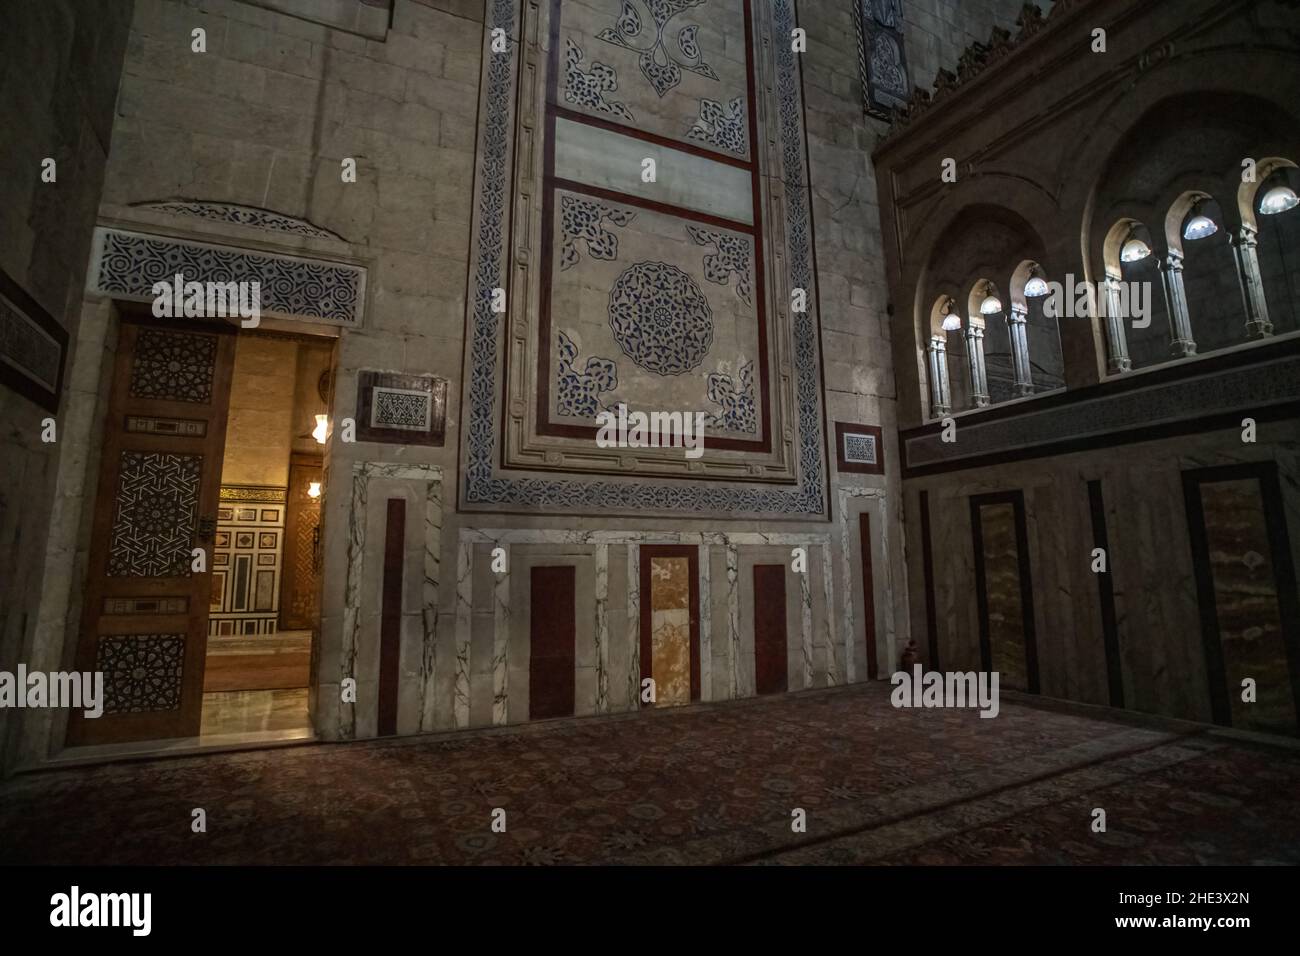 The lavish interior of the Al-Rifai mosque in Cairo Egypt, with marble walls and richly decorated doors. Stock Photo